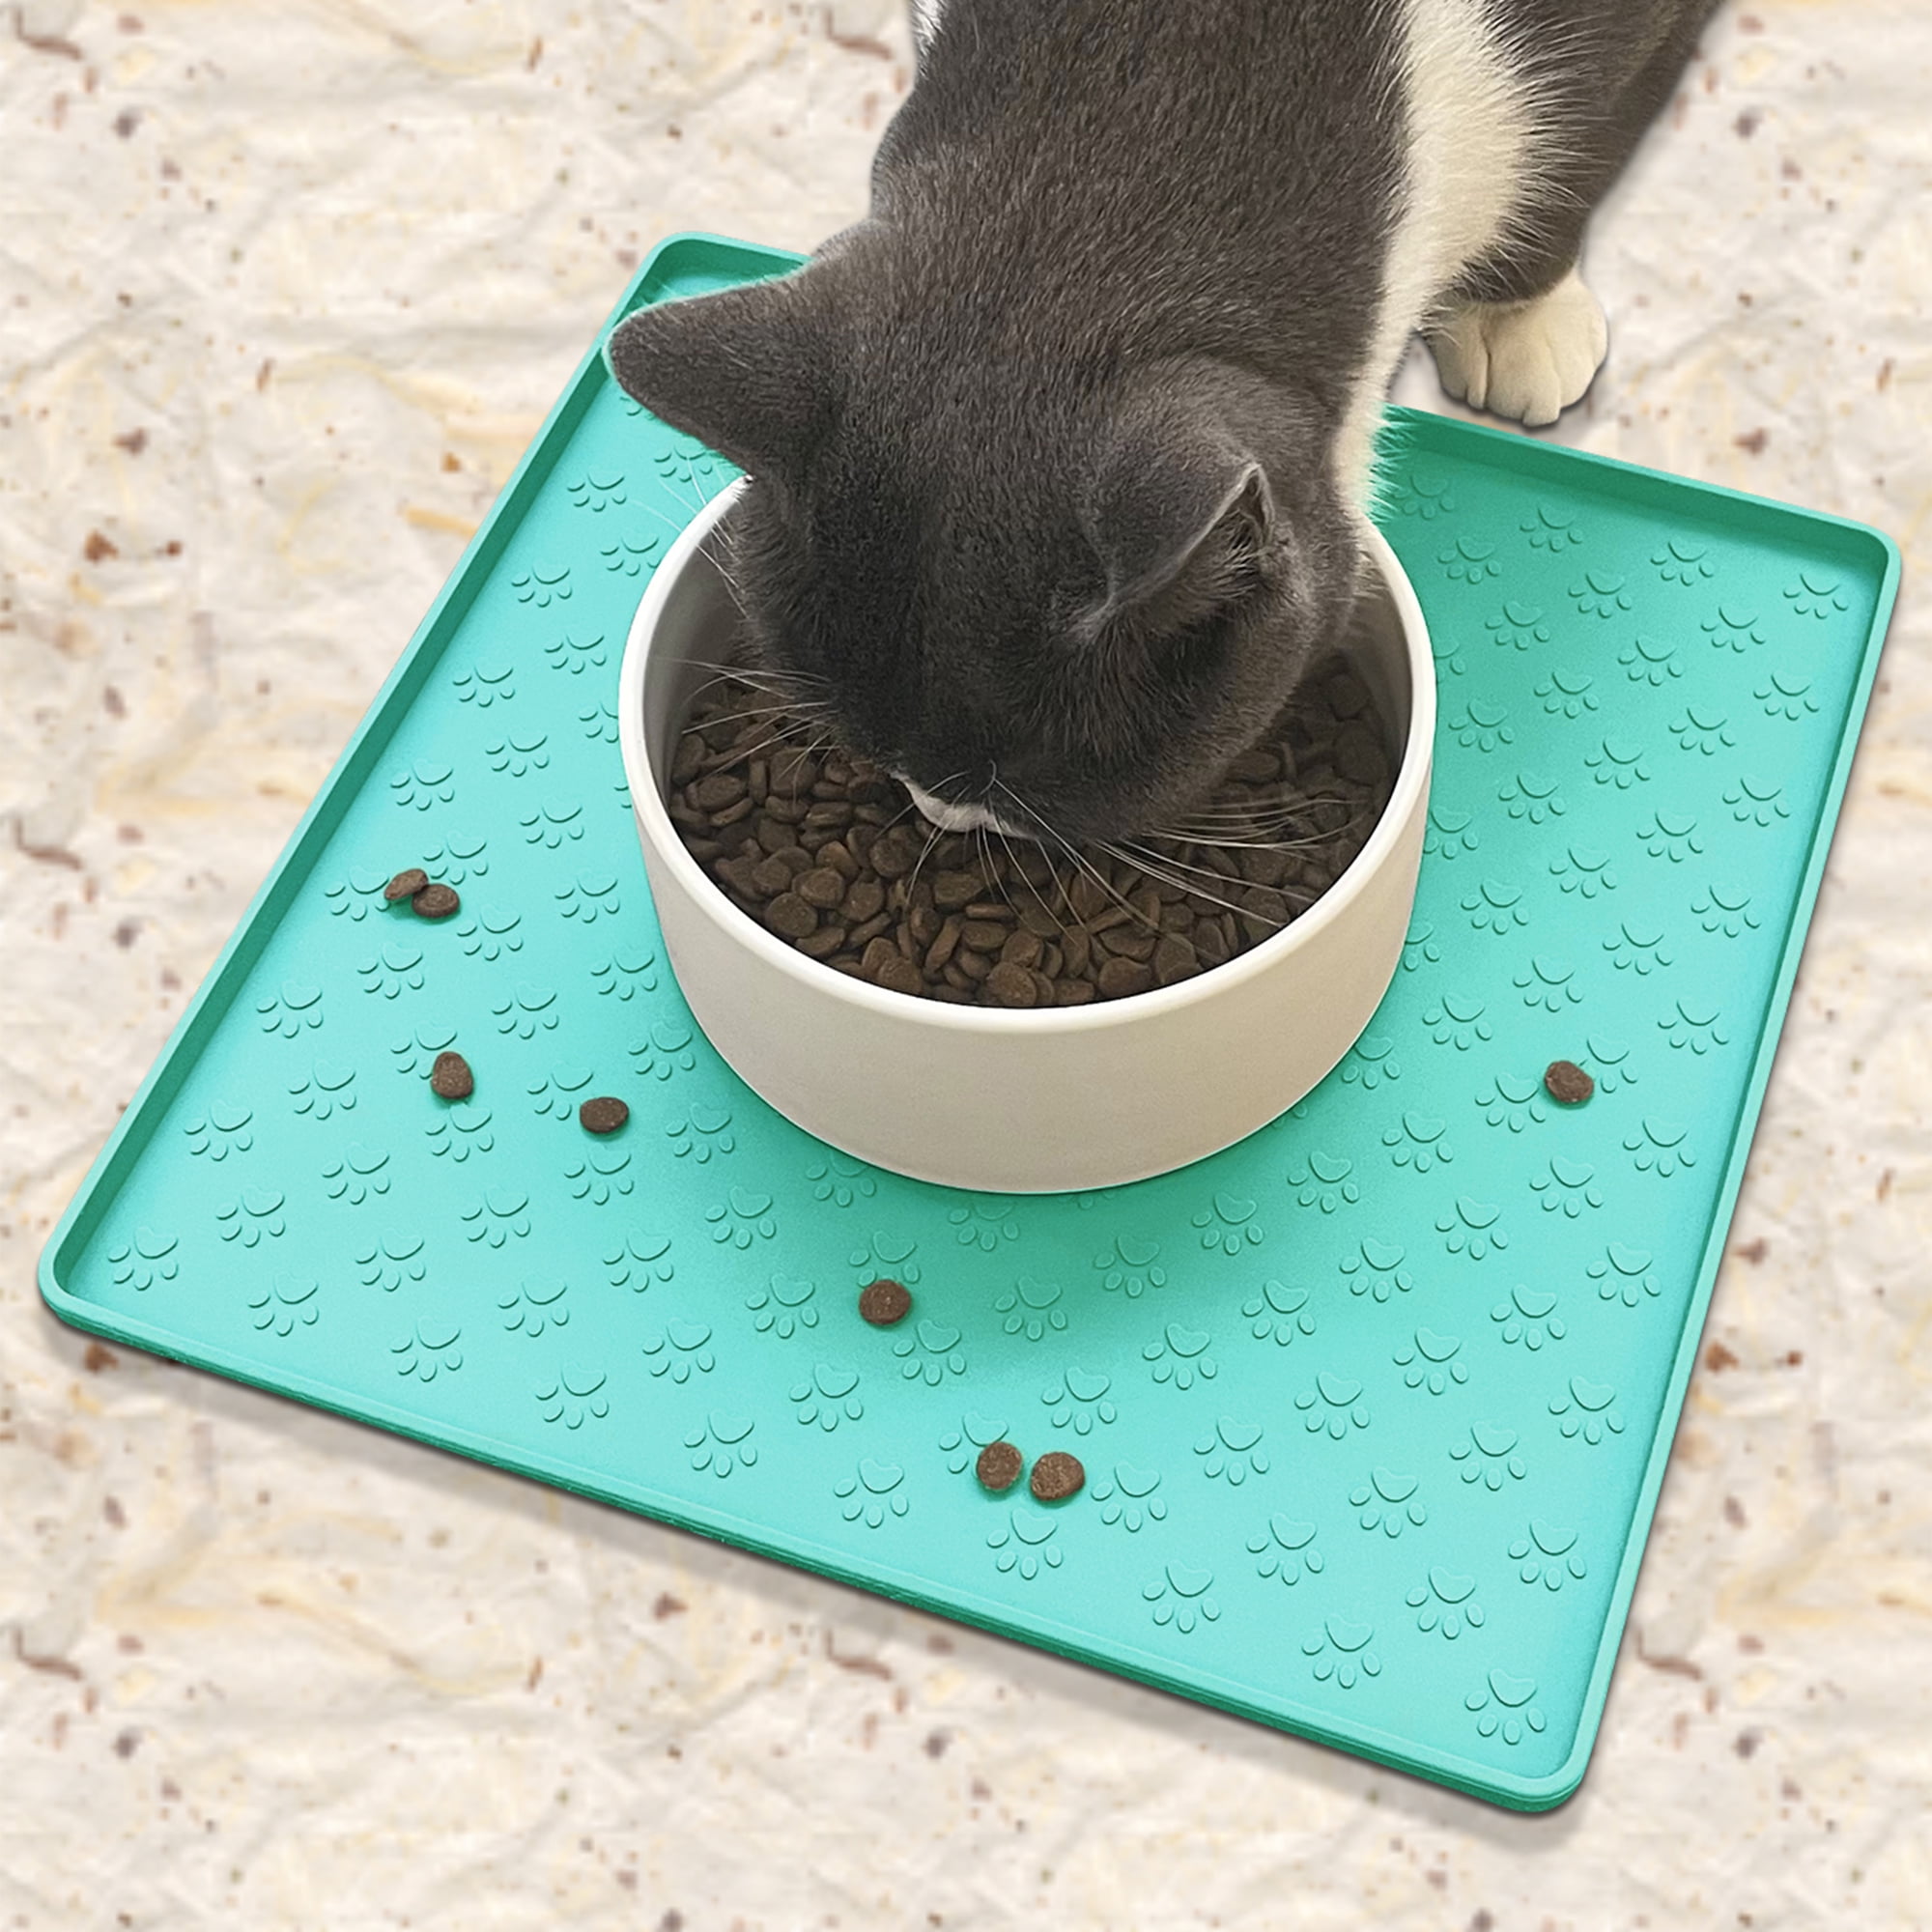 1xCat Placemat Silicone Anti-Slip Pet Feeding Mats With High Lips